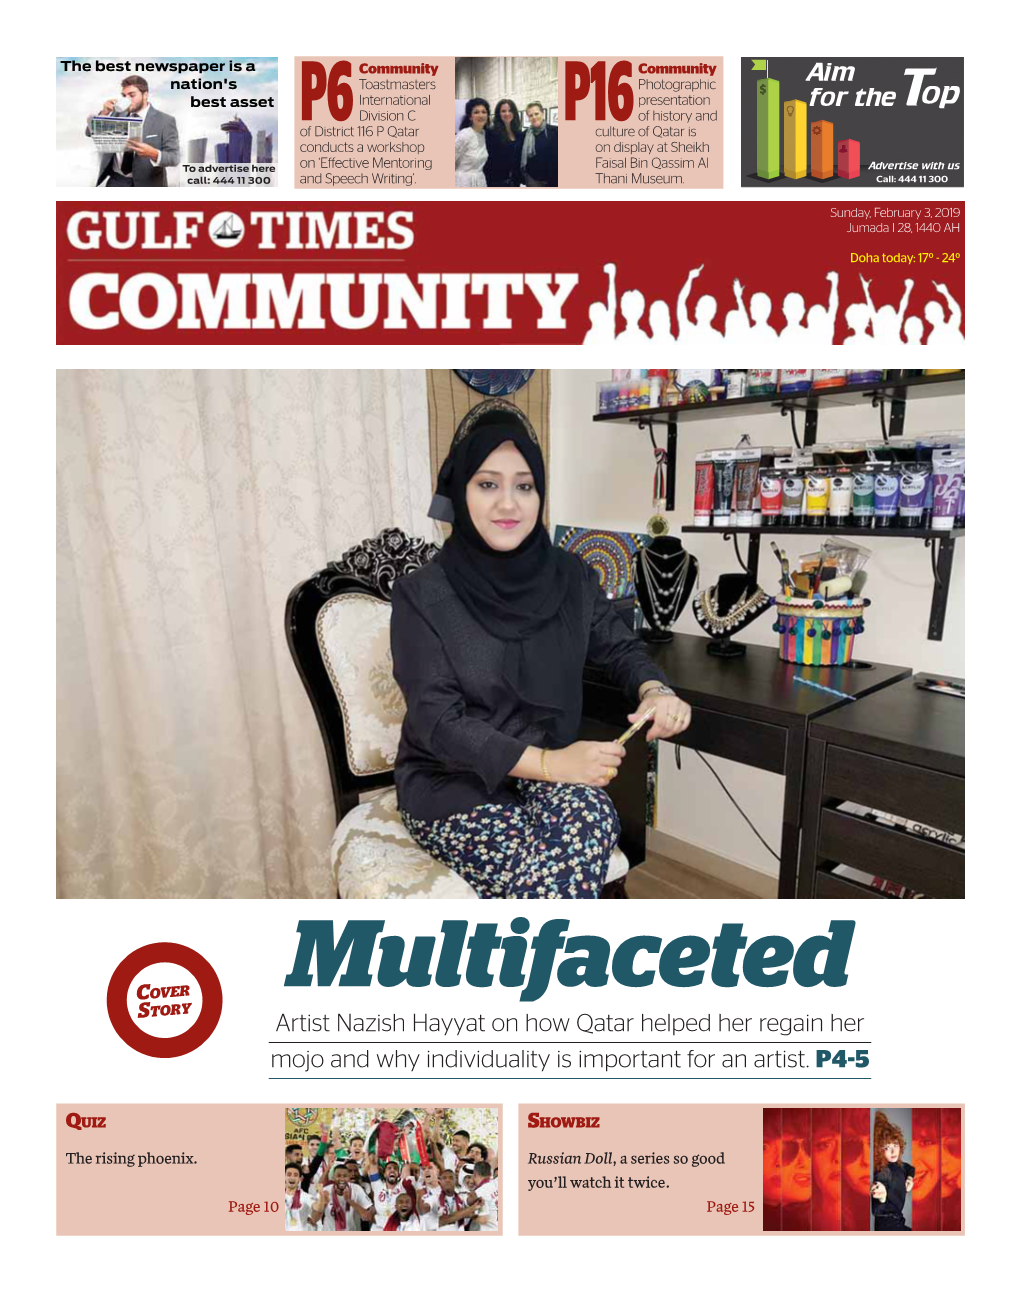 Artist Nazish Hayyat on How Qatar Helped Her Regain Her Mojo and Why Individuality Is Important for an Artist. P4-5